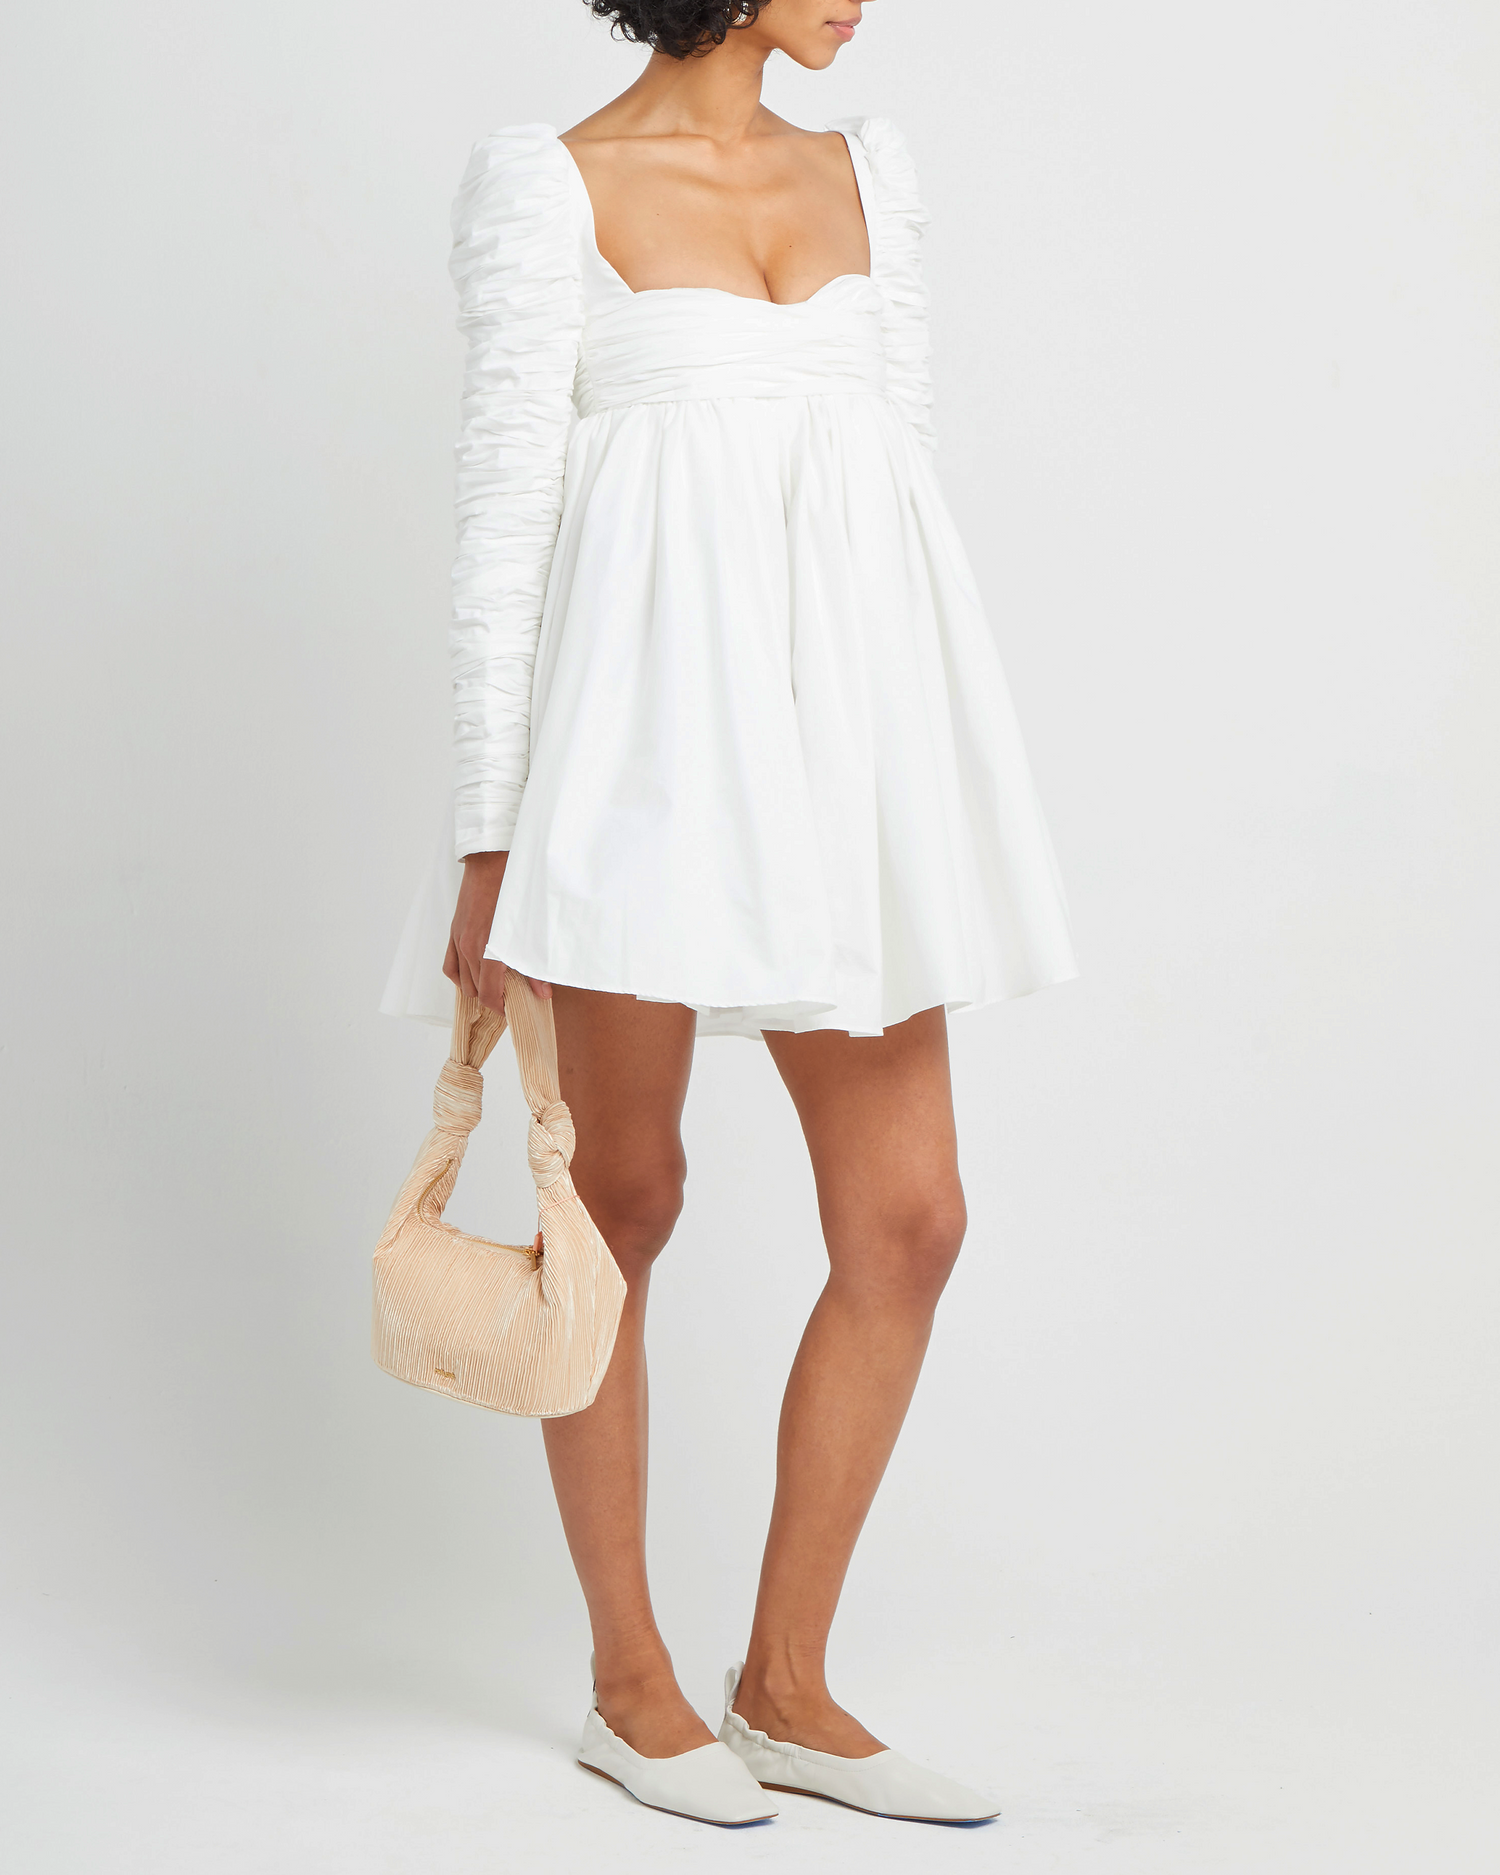 Third image of Structured Long-Sleeve Frock, a white mini dress, babydoll, long ruched sleeves, square neckline